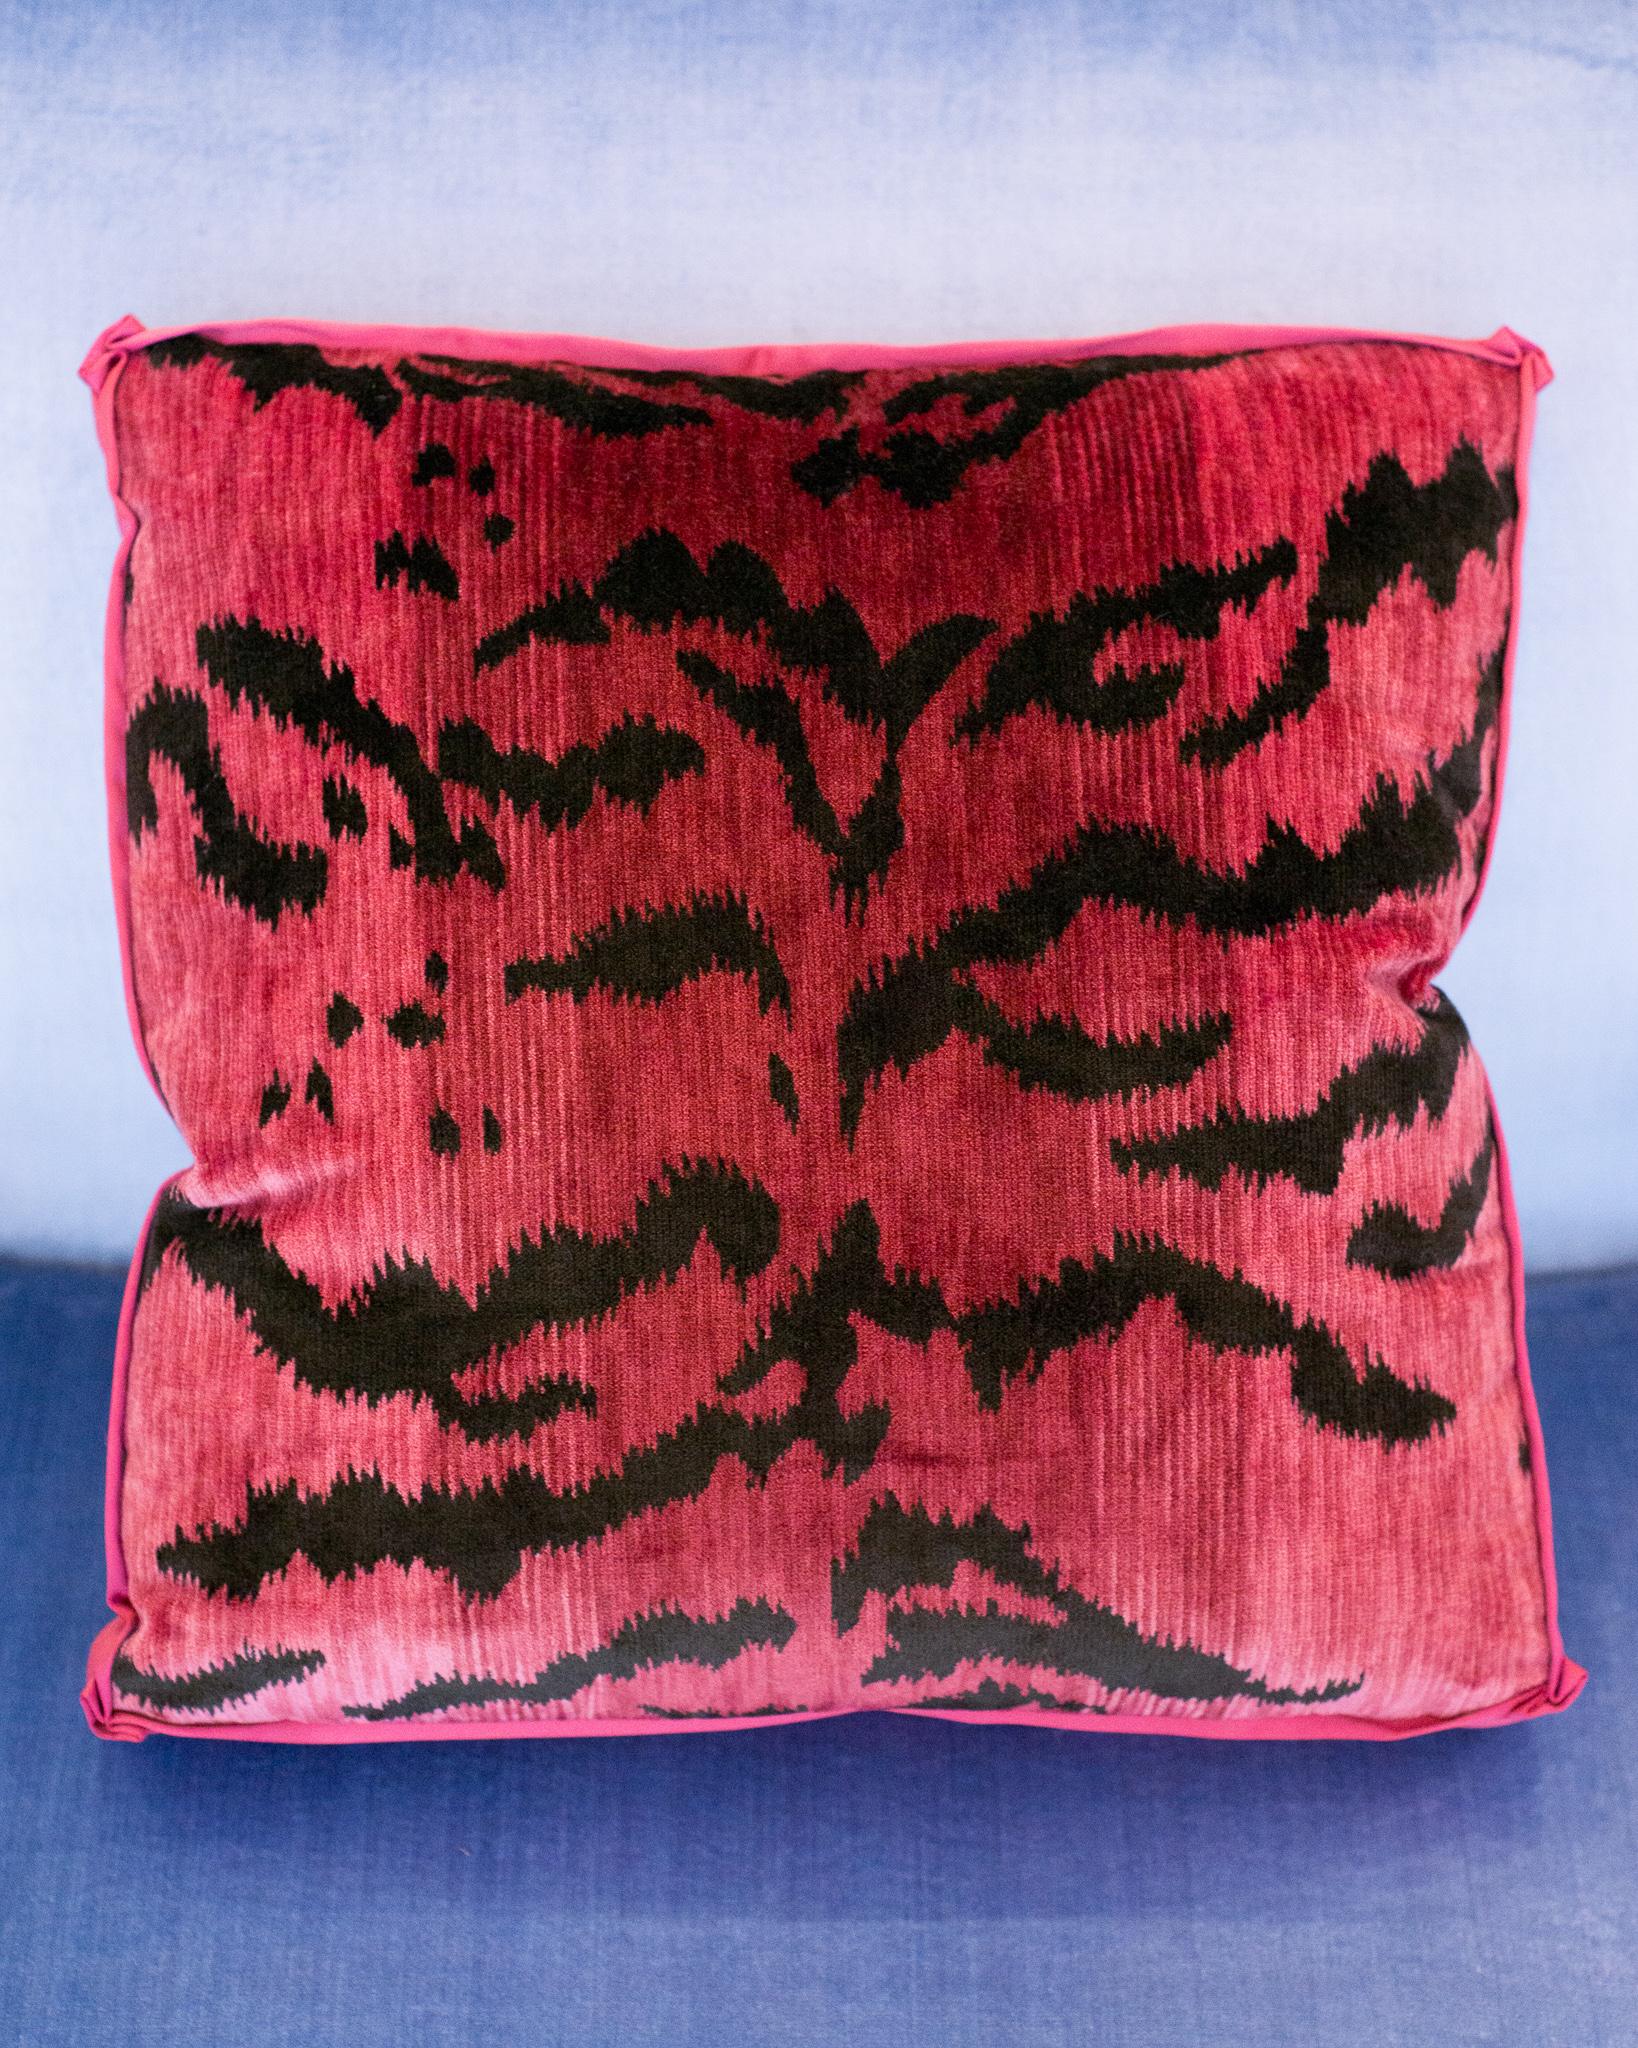 A luxurious Studio Maison Nurita pillow in our signature box design with Bevilacqua pink tiger print velvet with a satin border and pleated corners. Established by Luigi Bevilacqua, and operating out of Venice since 1875, Bevilacqua Tessuti produces